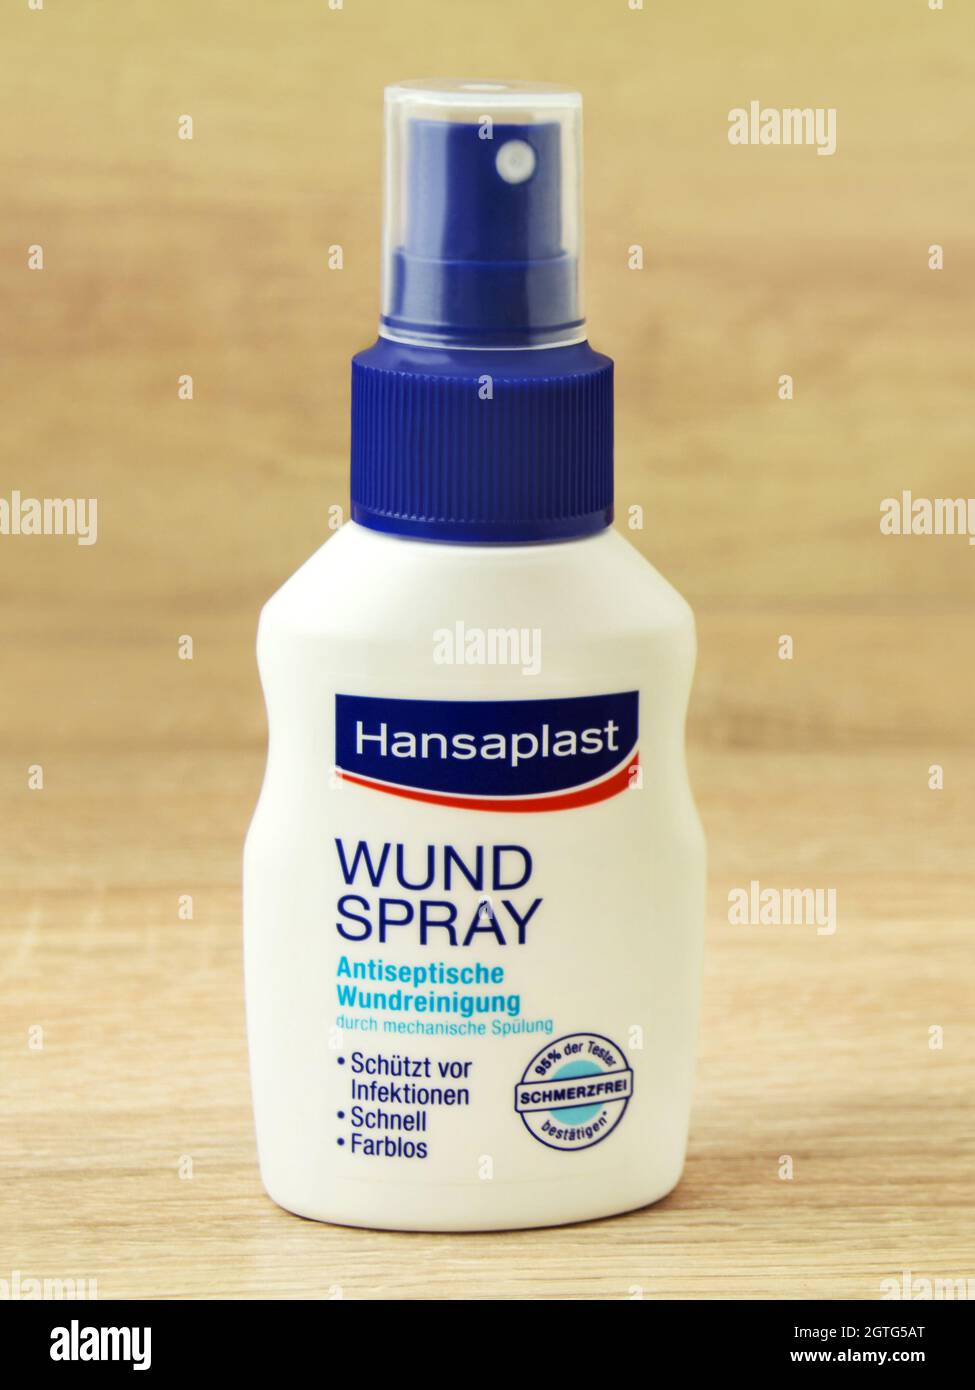 Hamburg, Germany - August 1, 2021: Hansaplast Wundspray disinfection and  cleaning spray on wooden background Stock Photo - Alamy